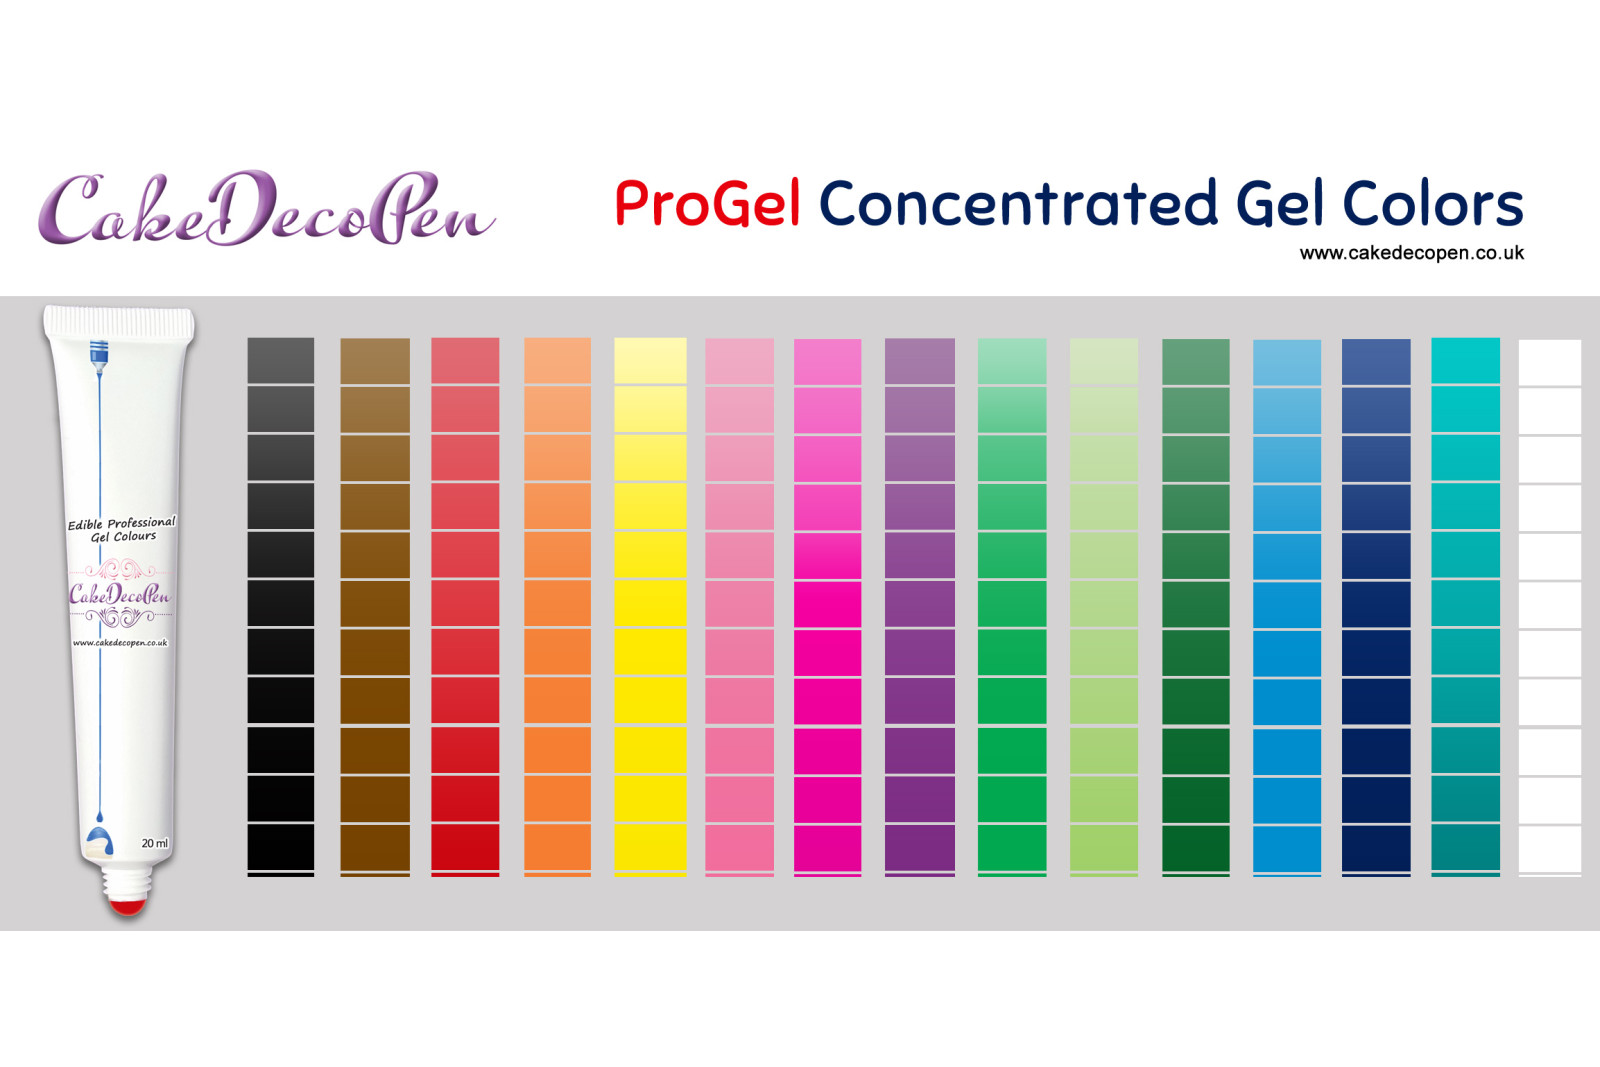 Black | Gel Food Colors | Concentrated ProGel | Cake Decorating | 30 ML | Christmas Edible Decorating Colours